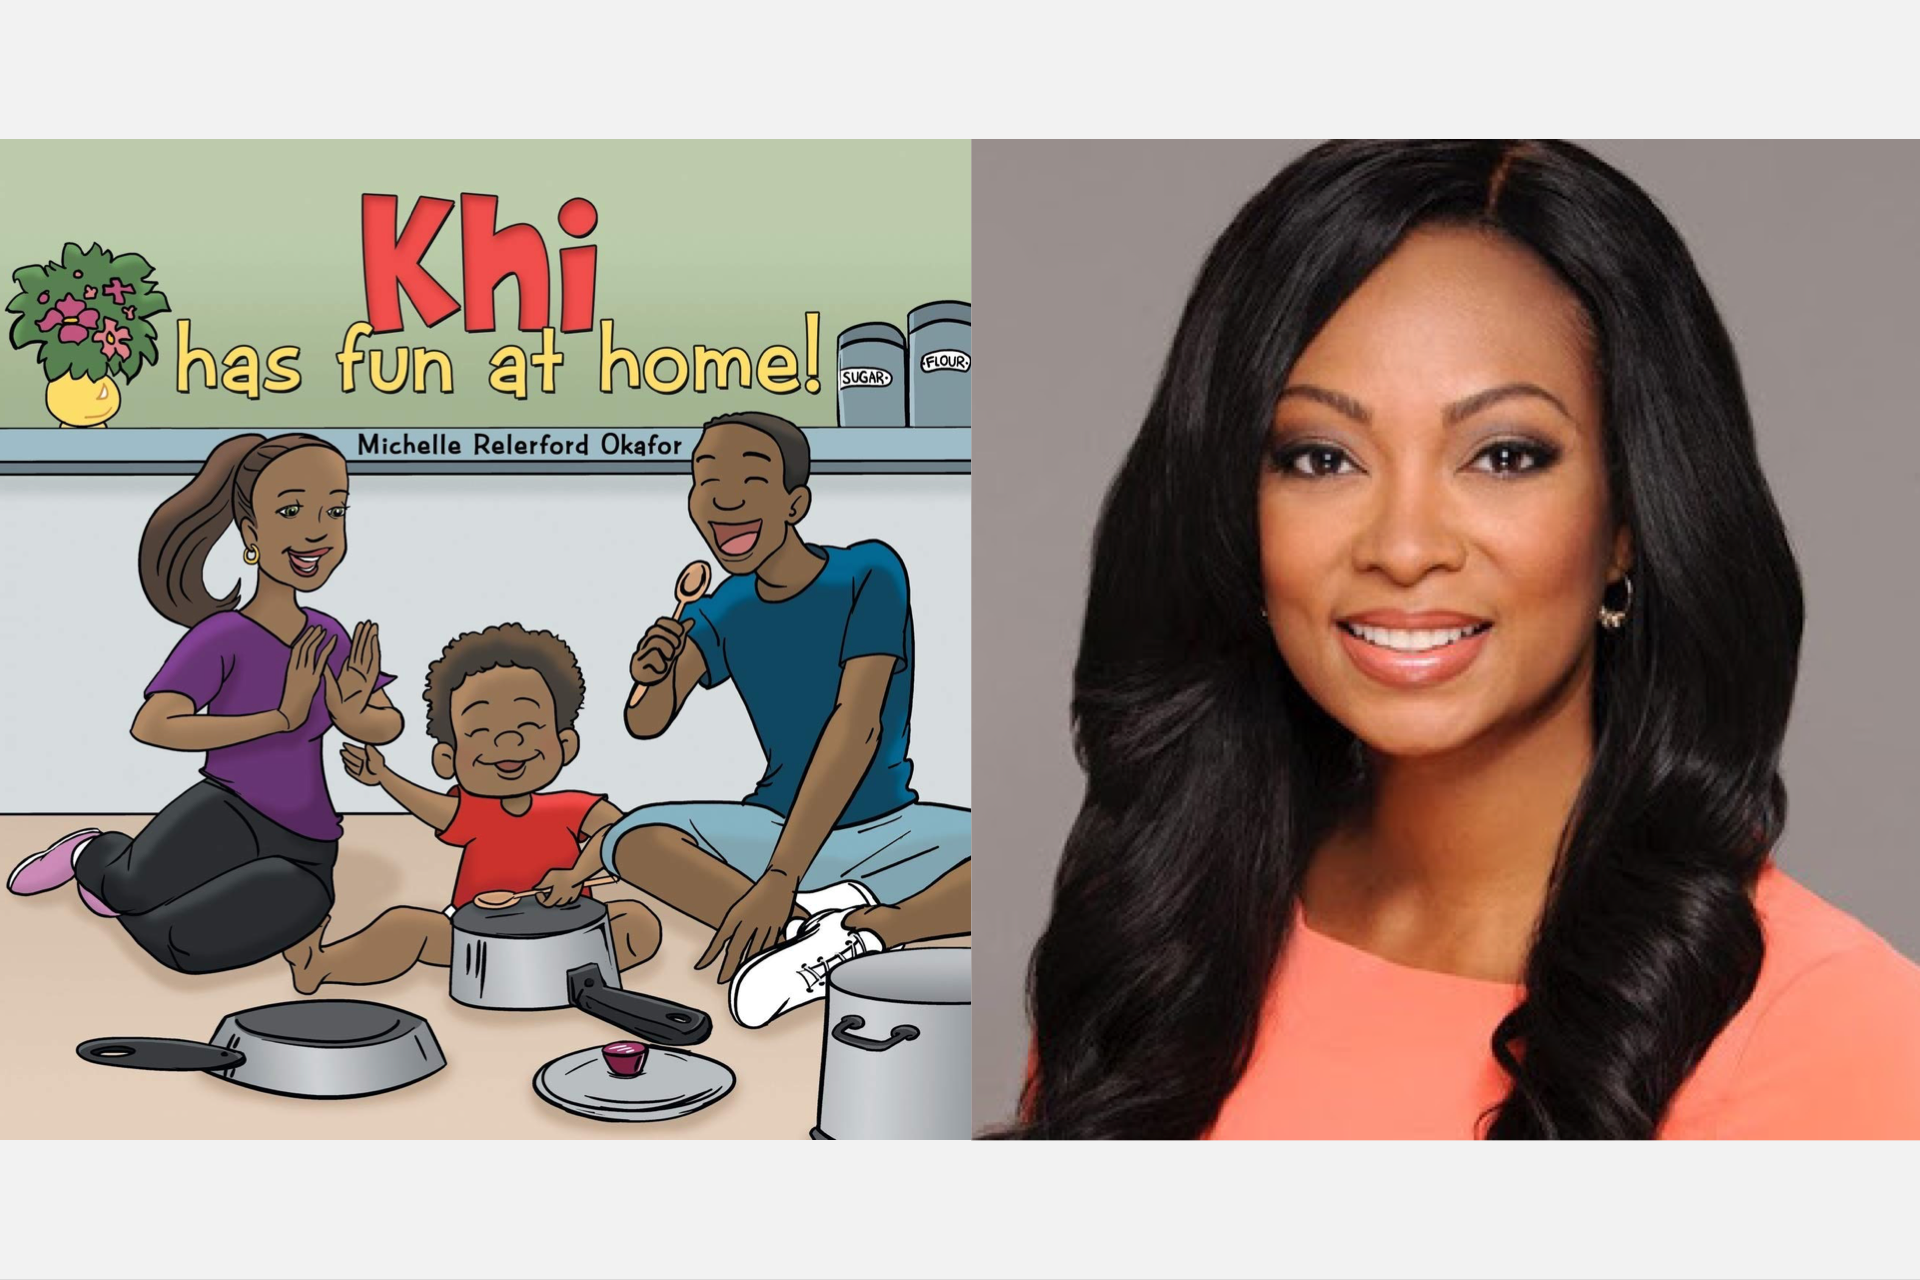 NBC 5 Chicago’s Michelle Relerford on Her New Children’s Book & How Families Can Make the Most Out of Staying at Home